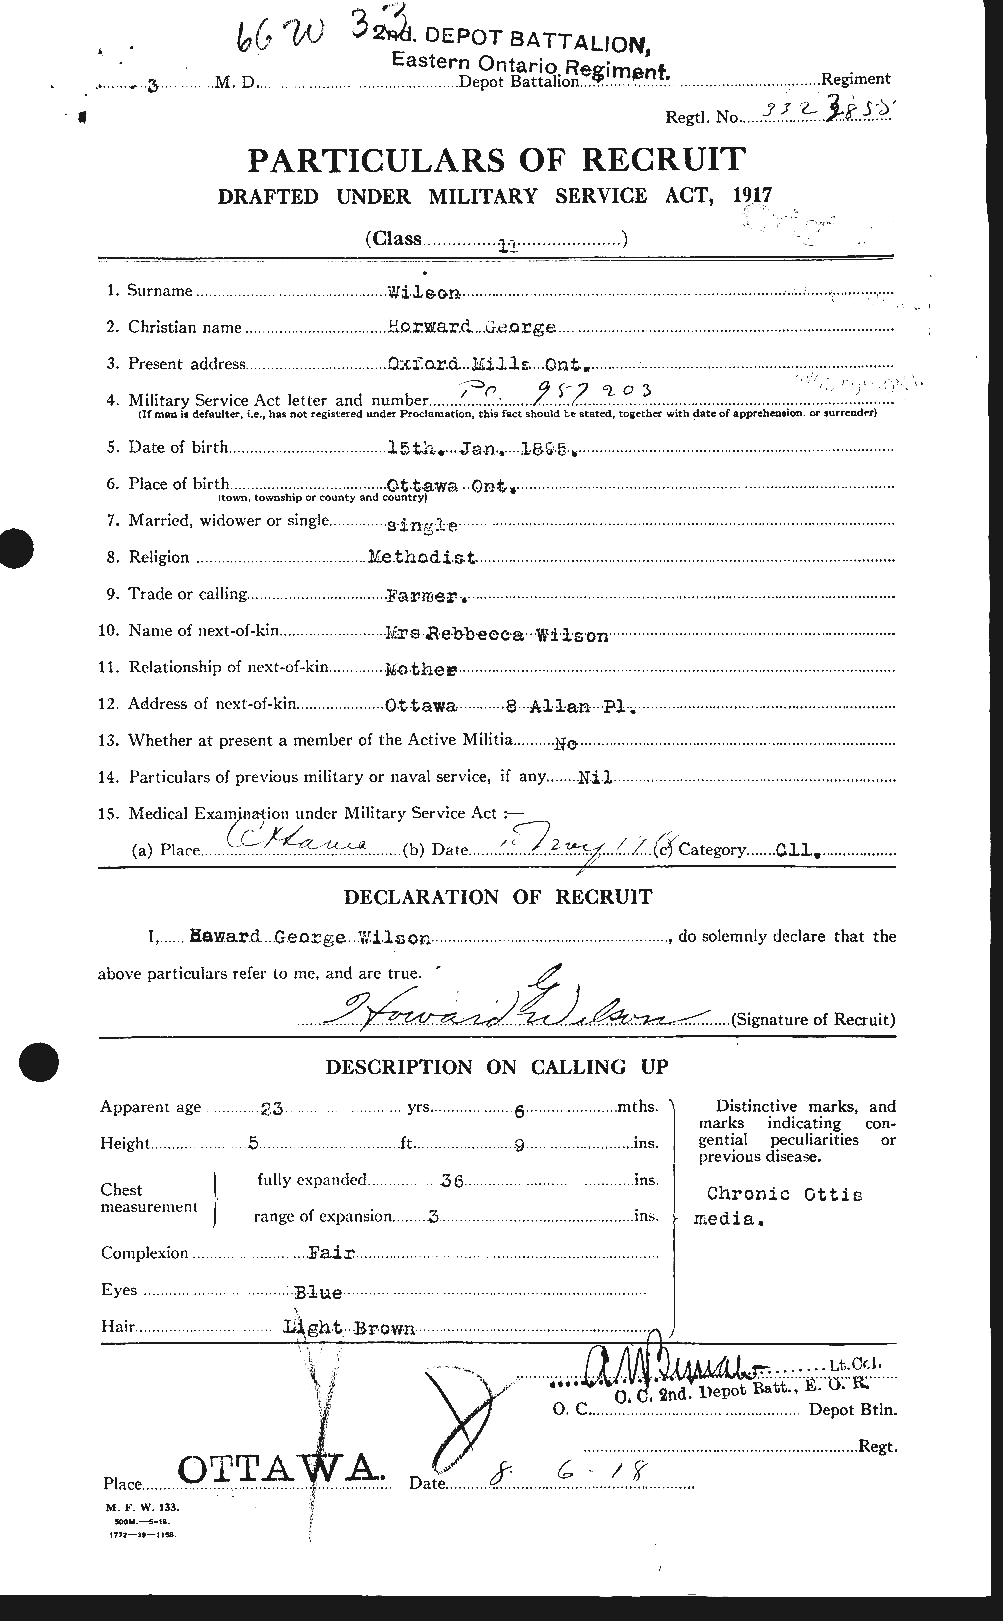 Personnel Records of the First World War - CEF 679592a